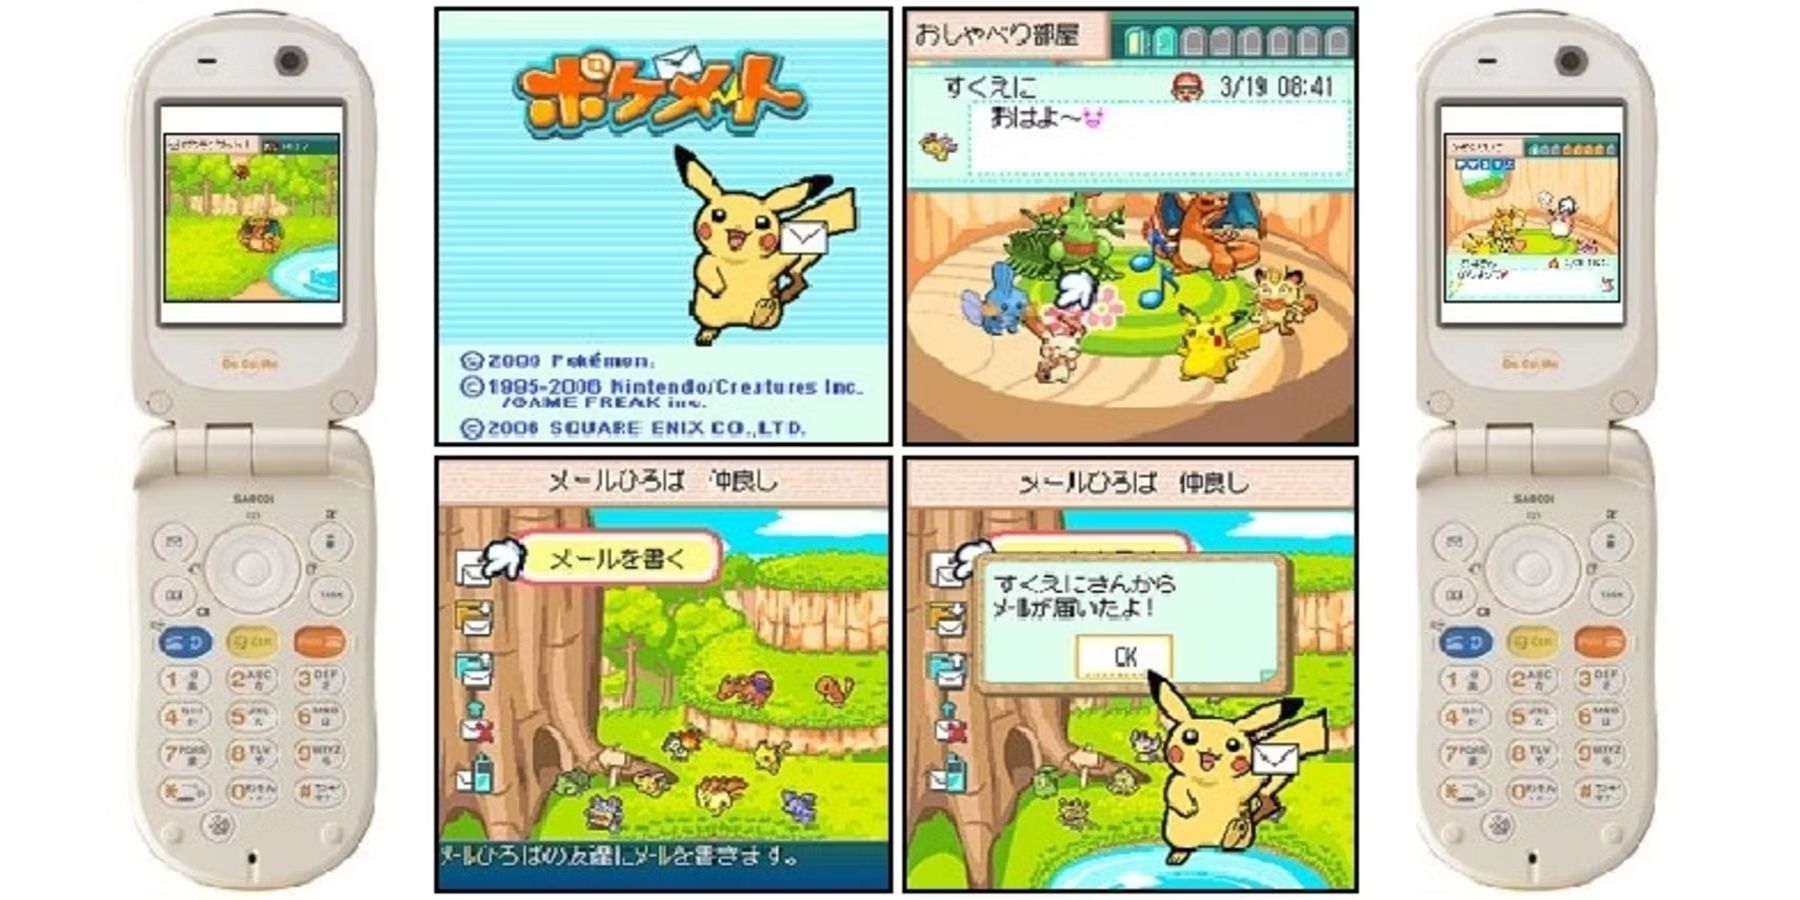 Pokemate advertisement for its services